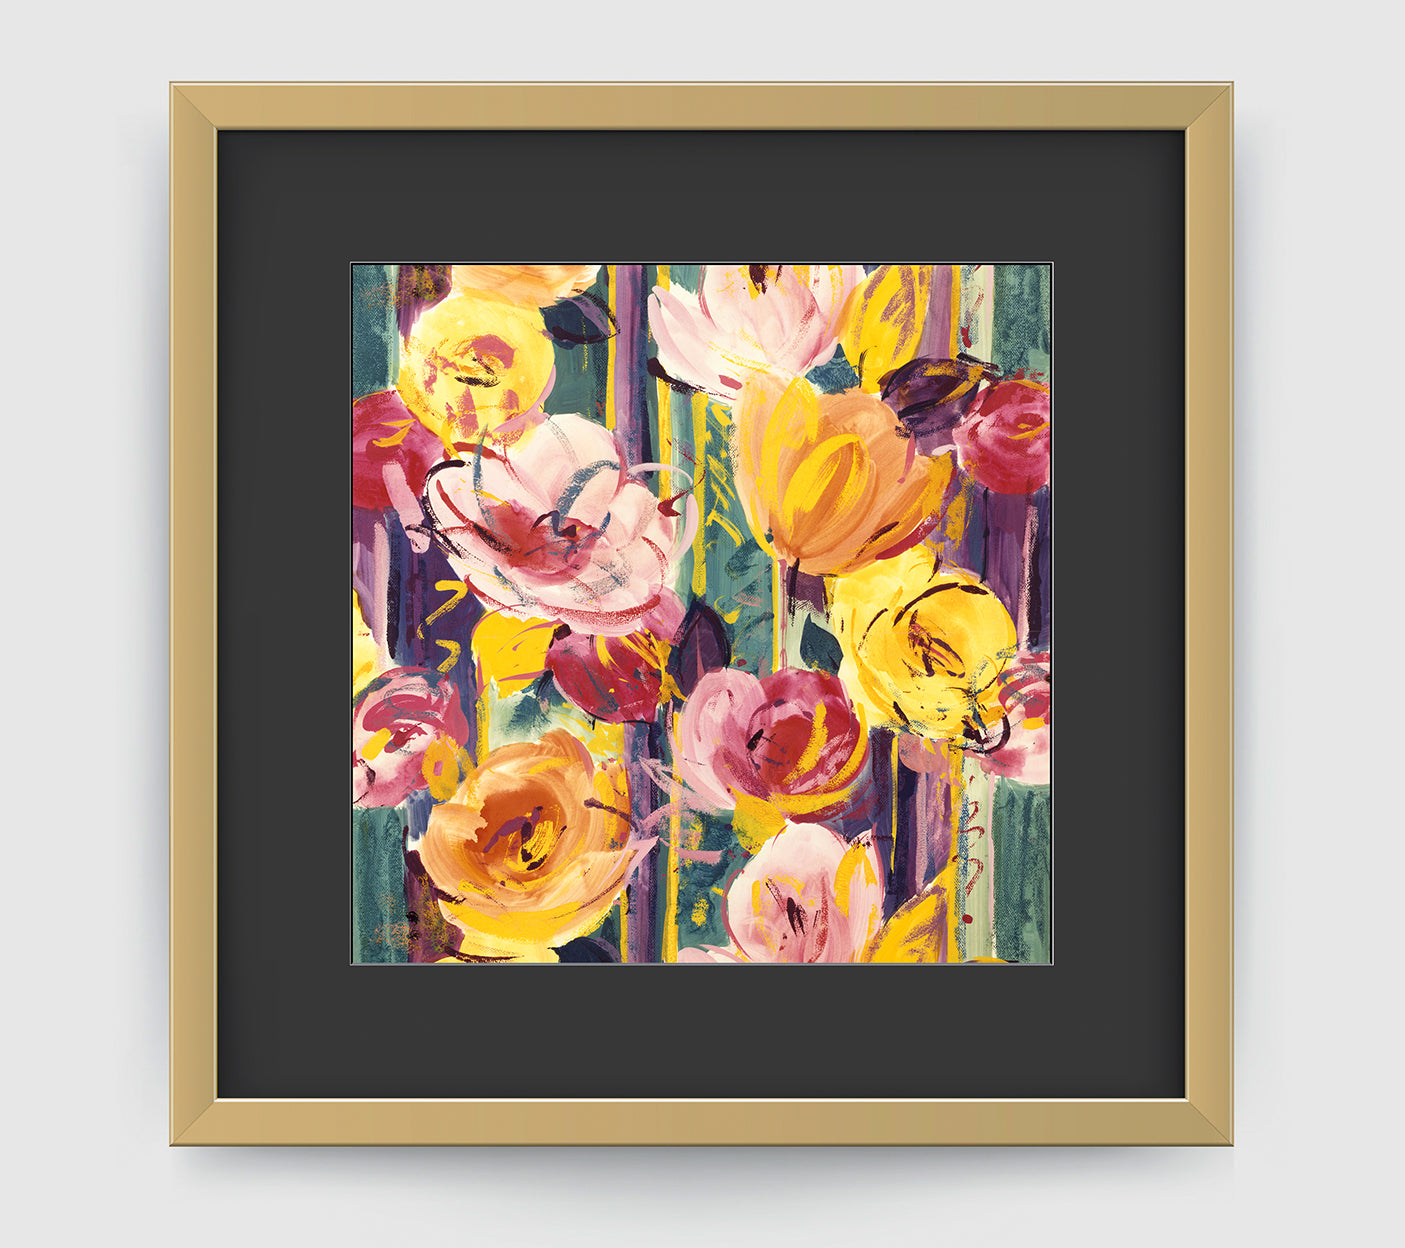 Delaunay Pink Gold Art Print - Impressionist Art Wall Decor Collection-Di Lewis